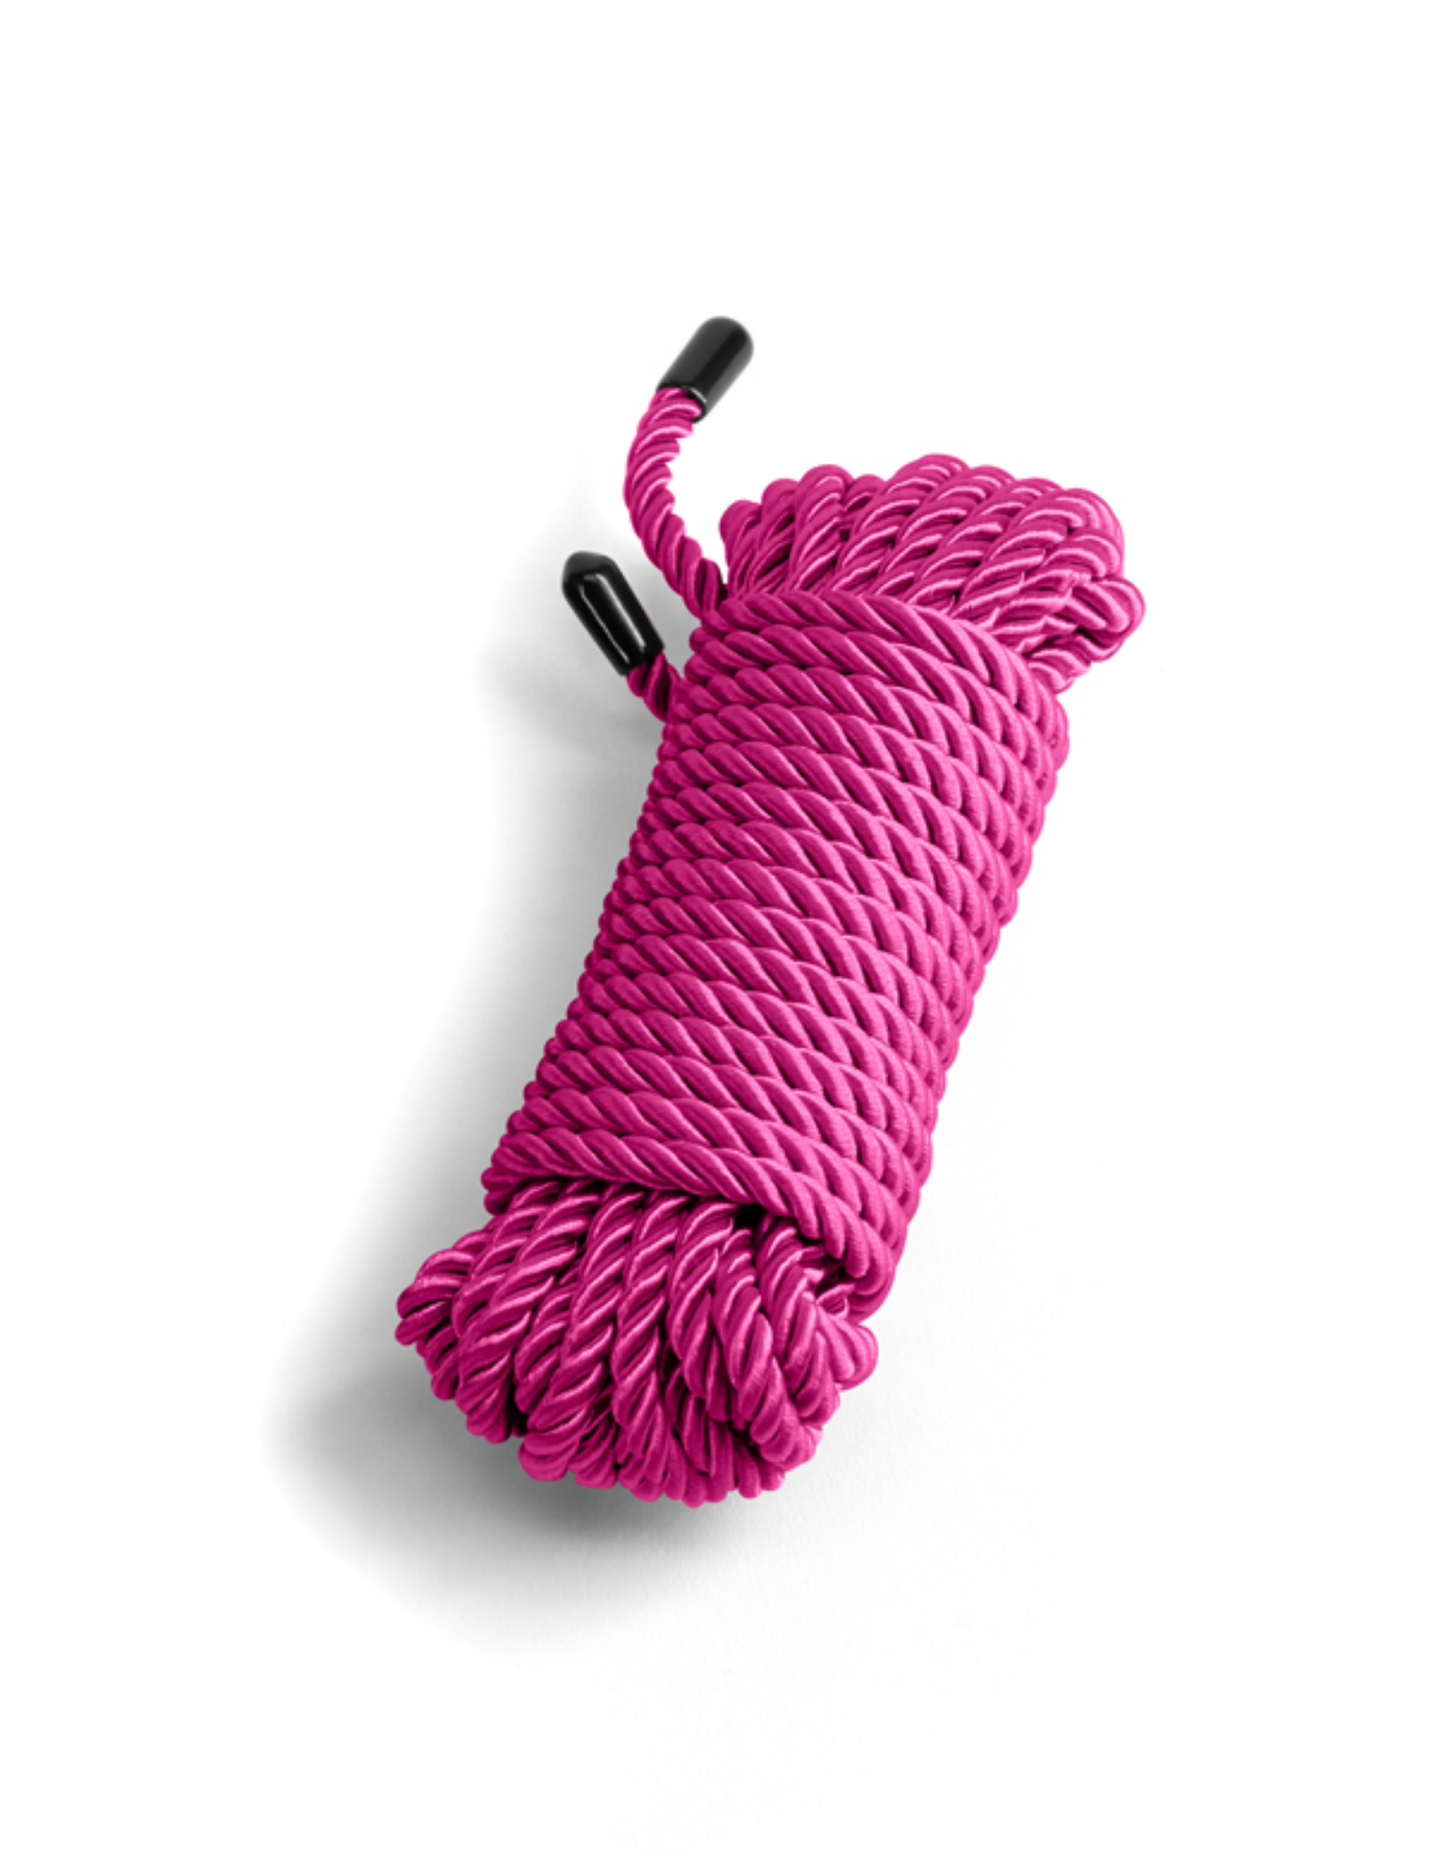 Close-up of the bundle of Bound Rope from NS Novelties (pink) shows its soft texture and finished ends.